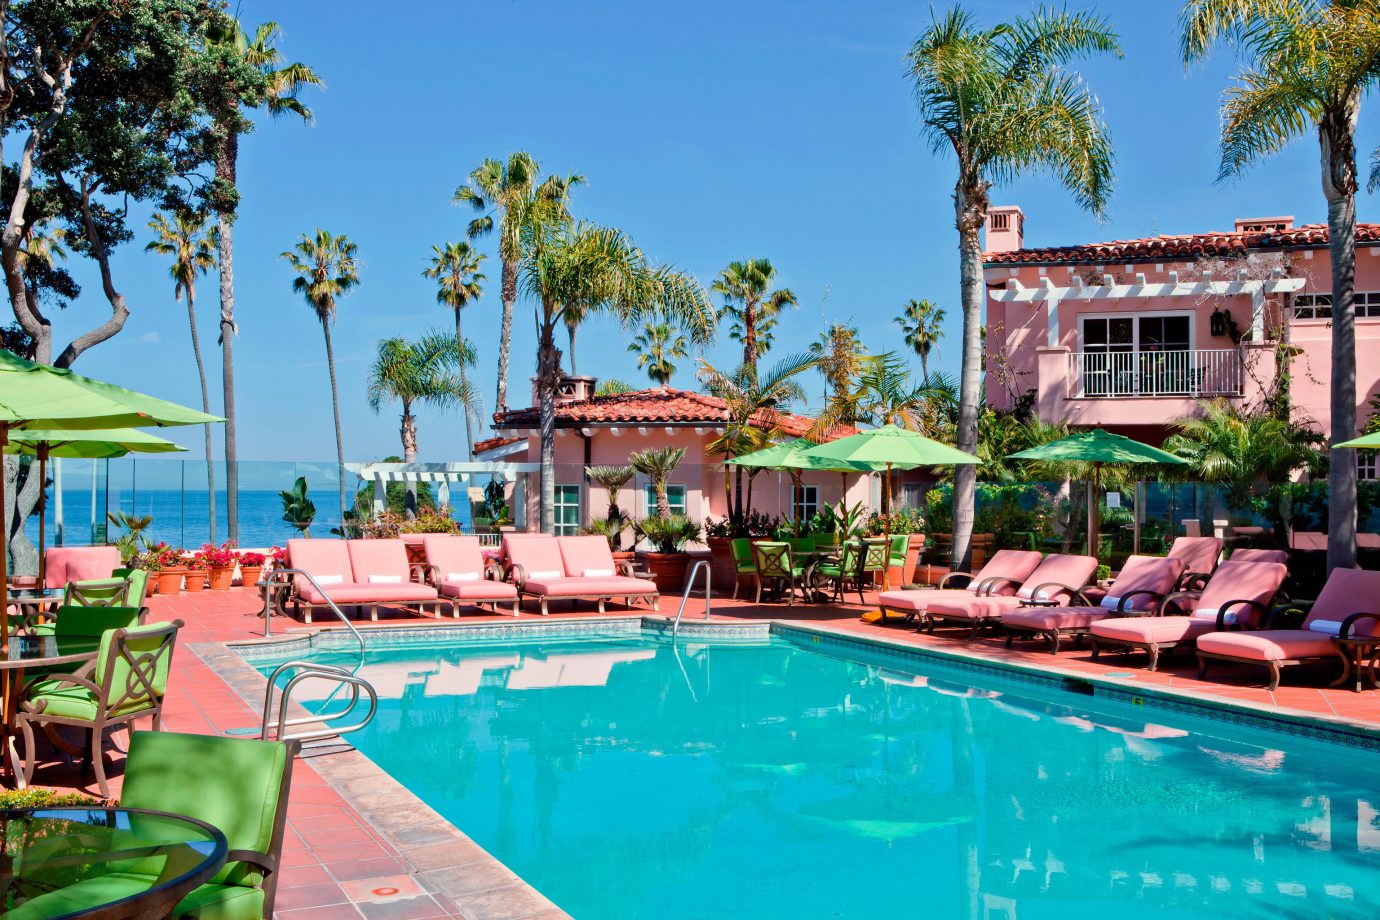 The 11 Best California Beach Hotels for Hitting the Sand 